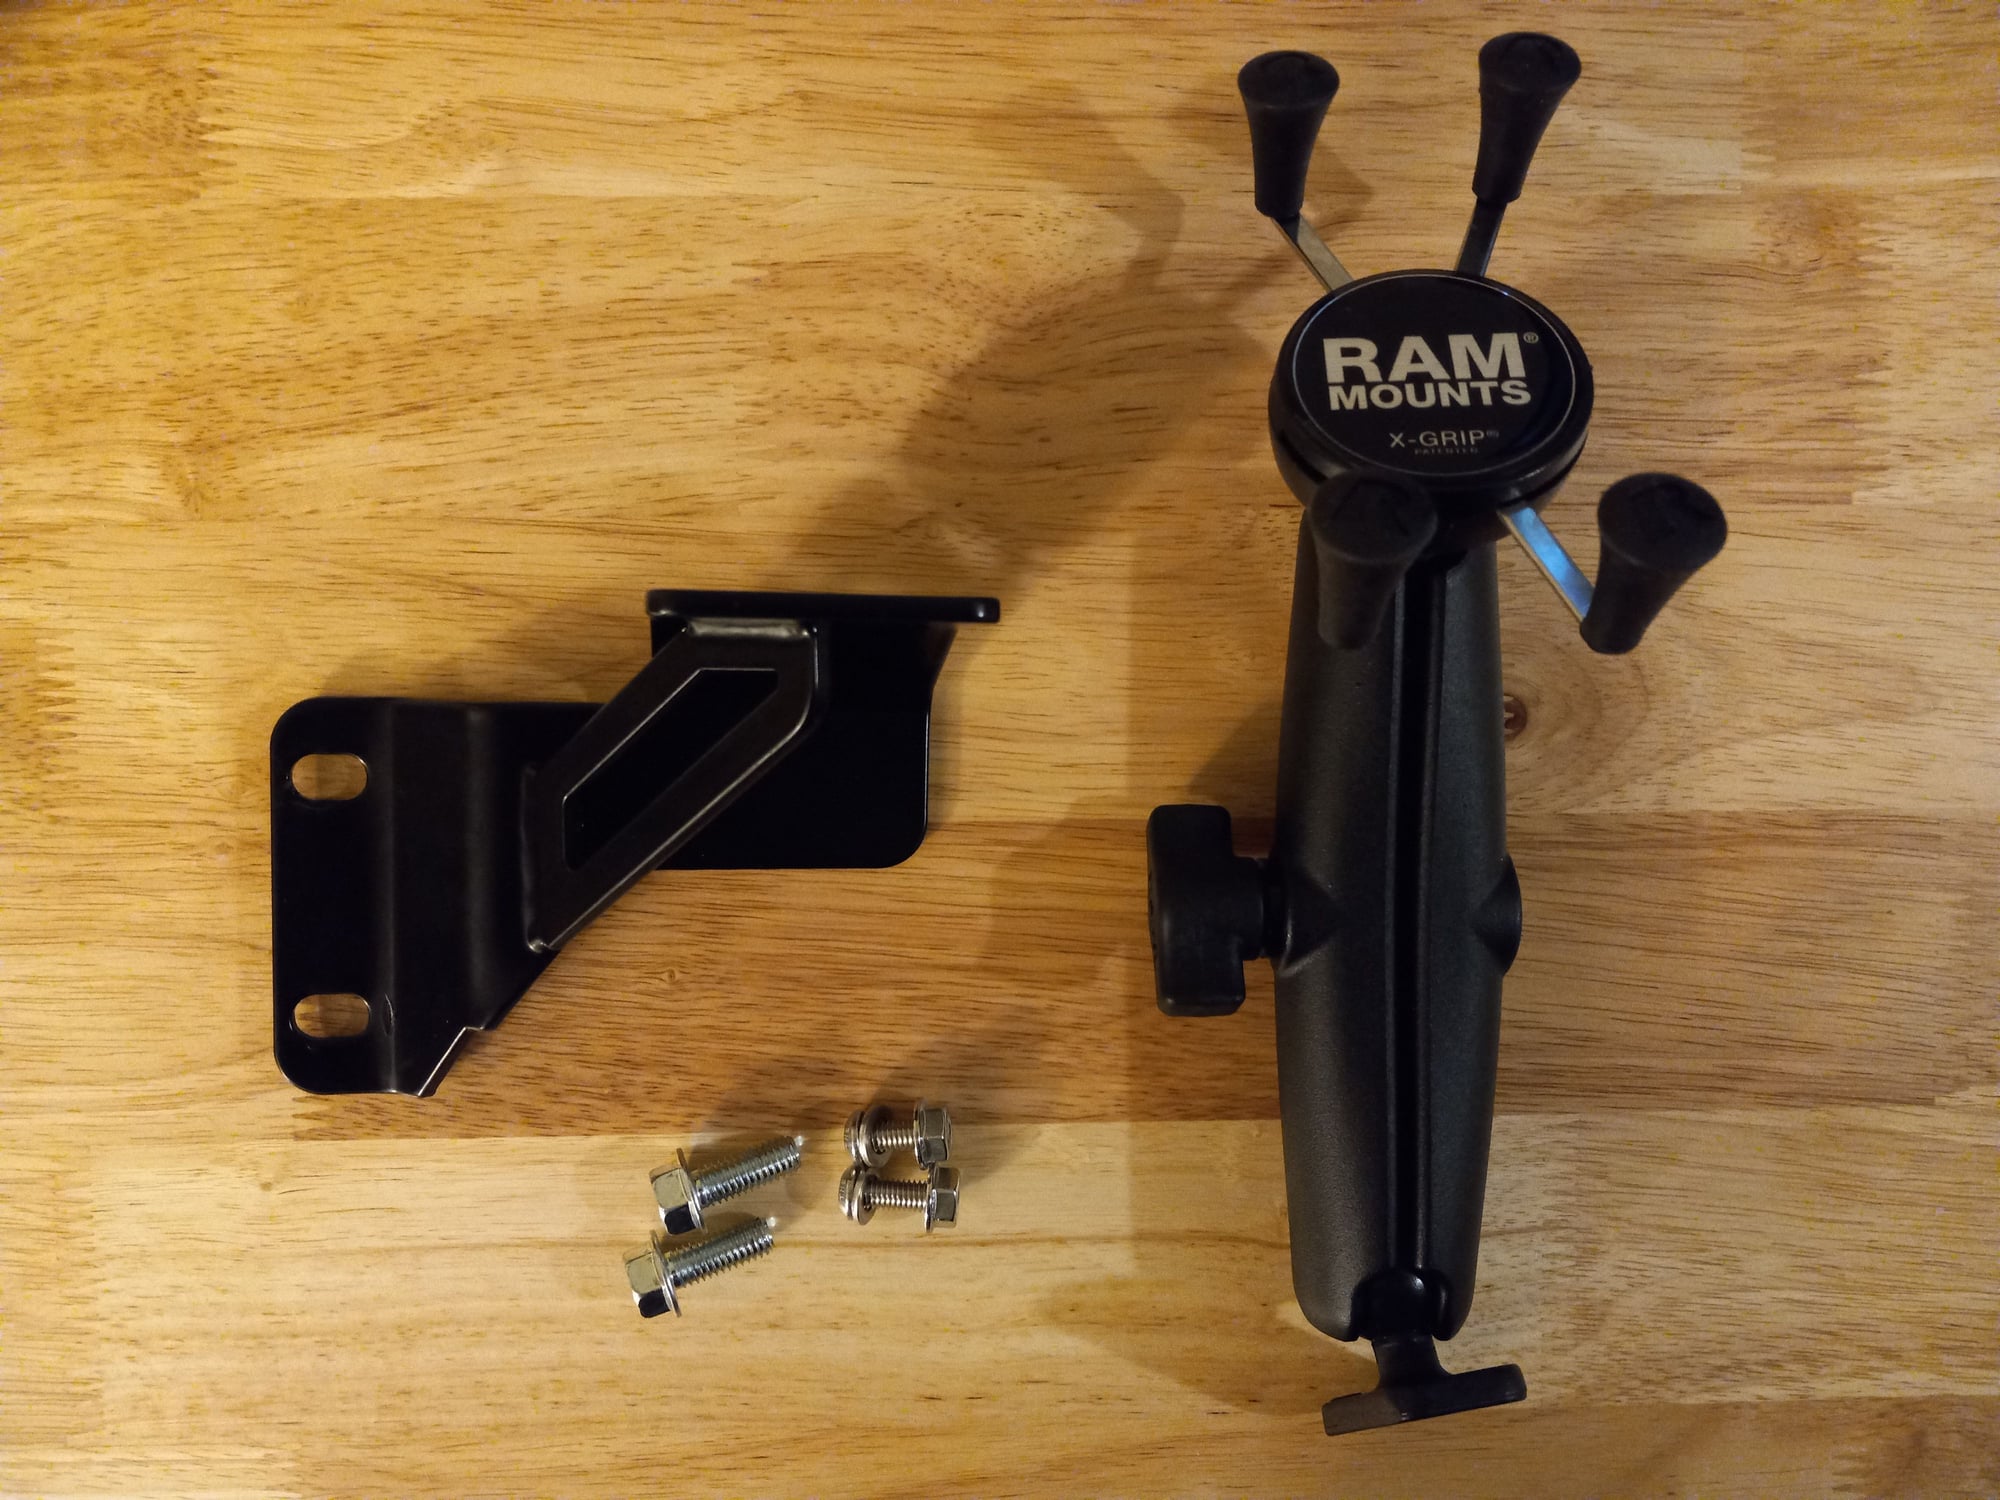 Miscellaneous - FD RX-7 JP3 Motorsports RAM Mount bracket with X-Grip Accessories - New - 1993 to 1995 Mazda RX-7 - Austin, TX 78704, United States